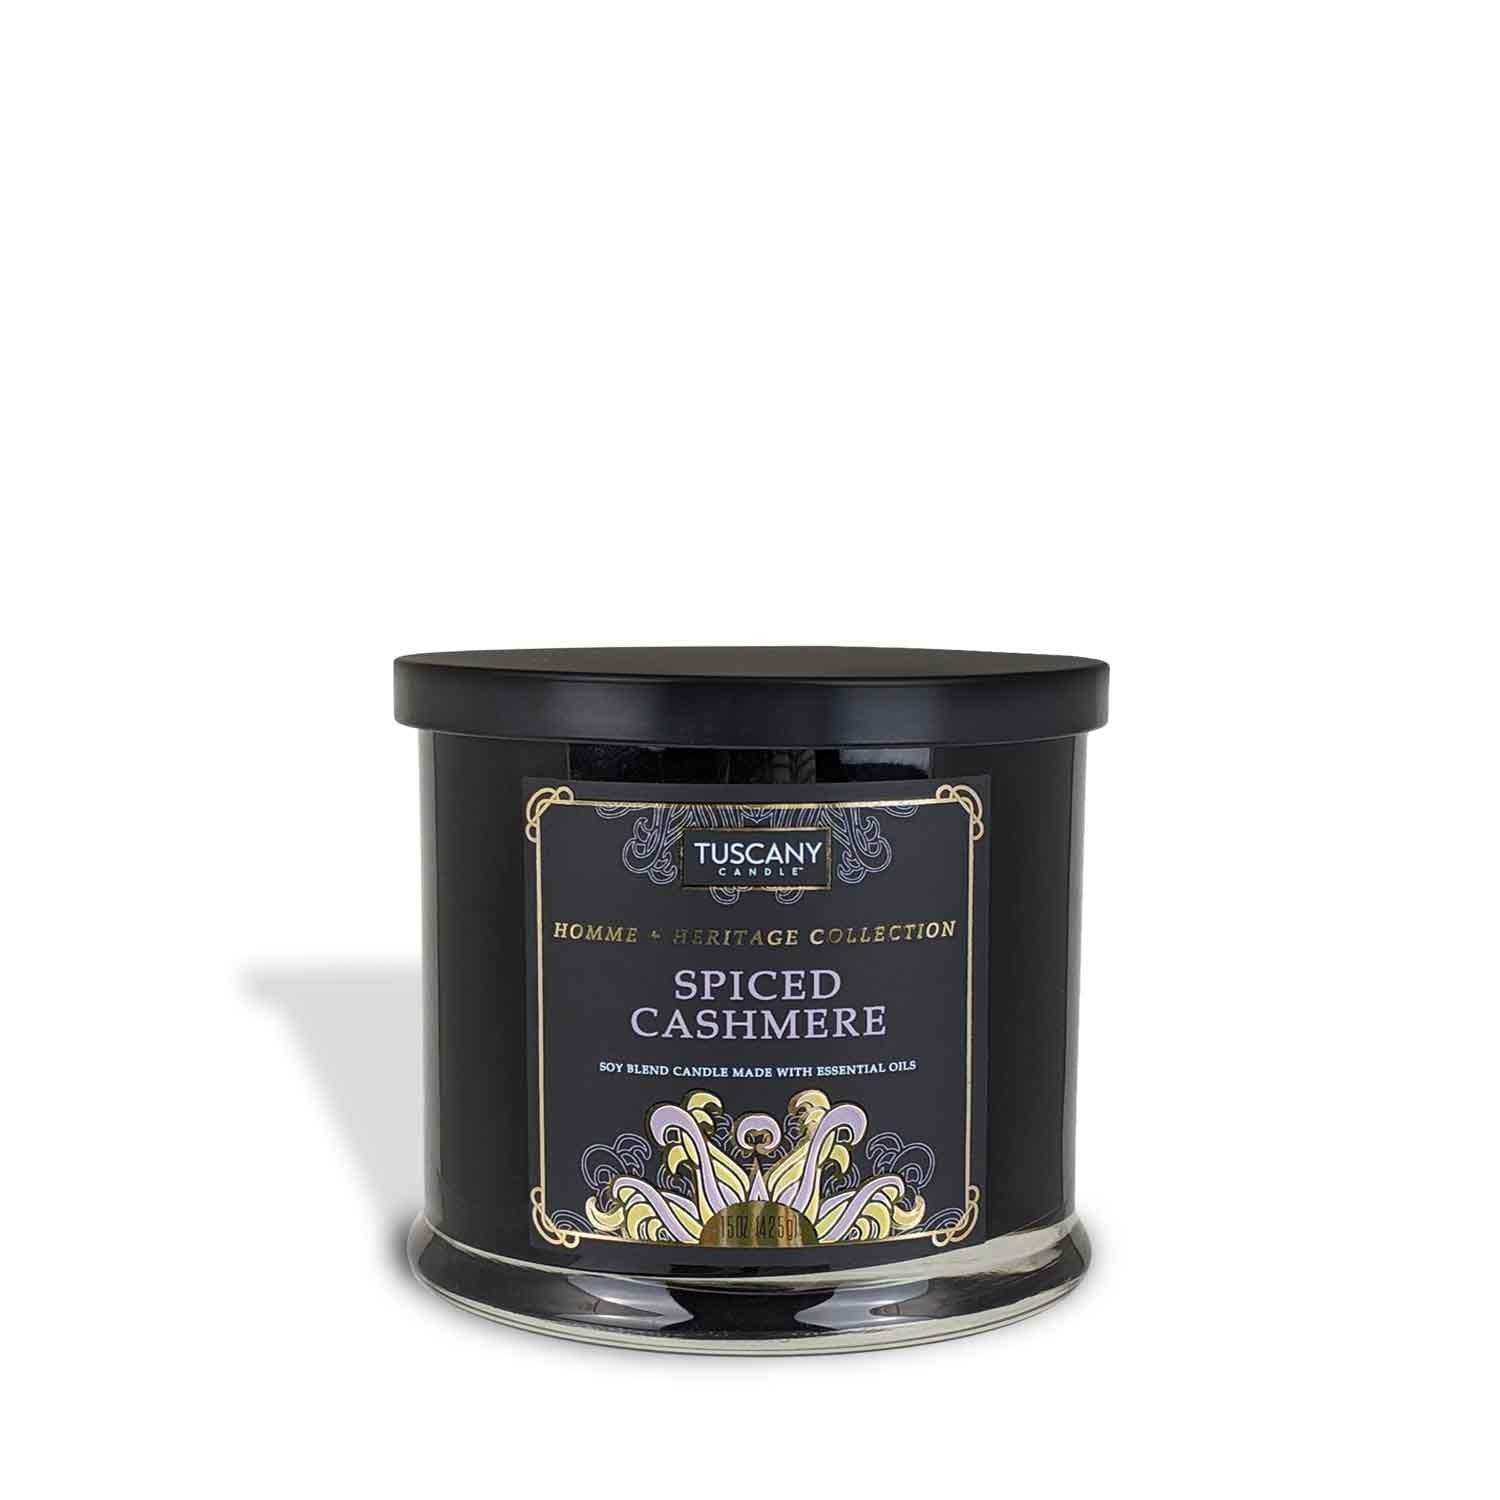 An elegant, Tuscany Candle Spiced Cashmere Scented Jar Candle (15 oz) – Homme + Heritage Collection in a black tin exuding a sense of masculinity on a serene white background.